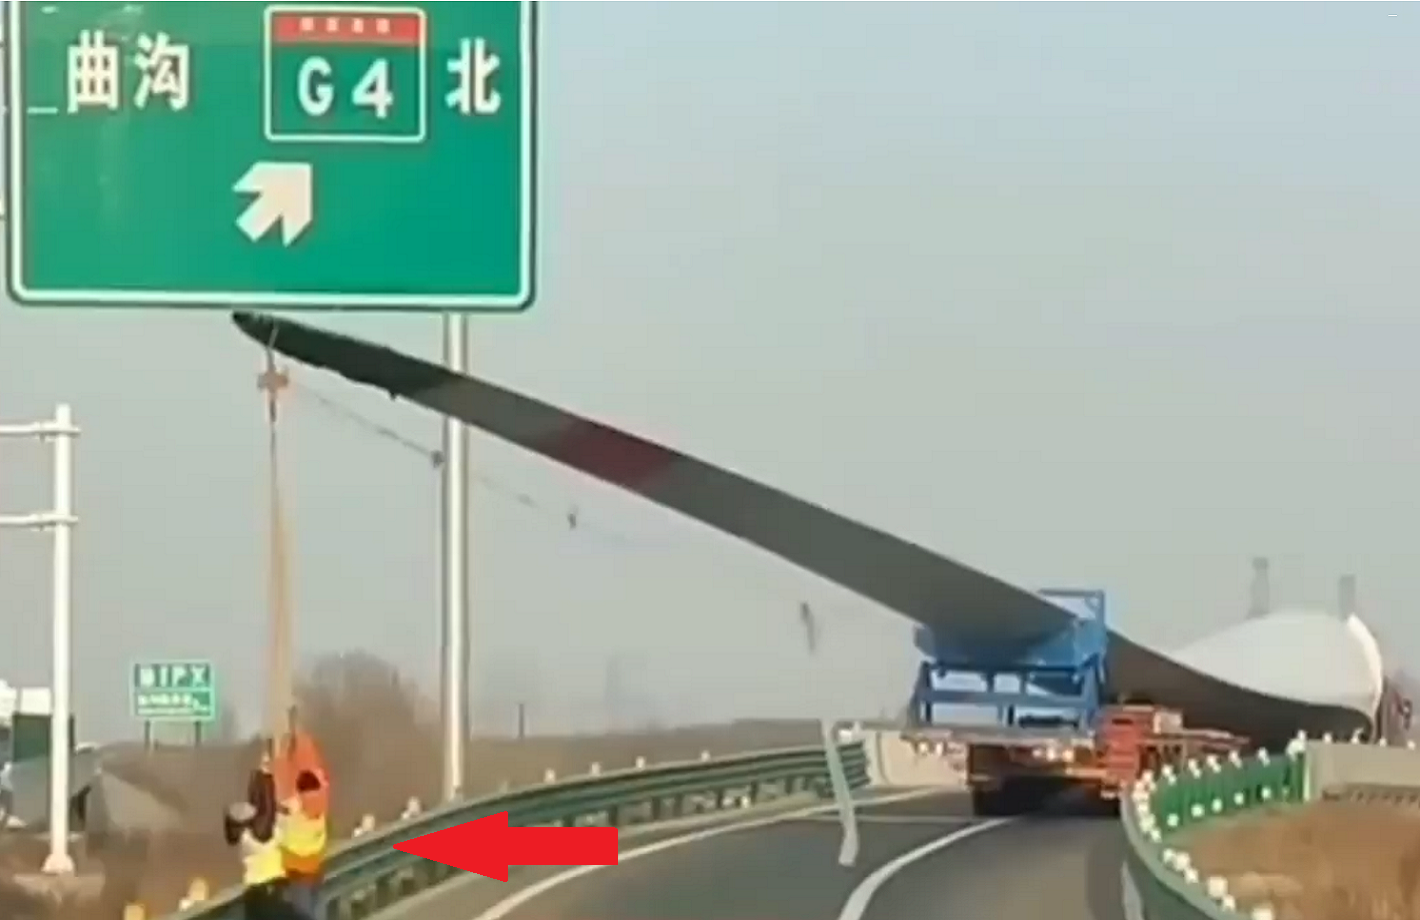 Transporting wind turbine blades: when something goes wrong